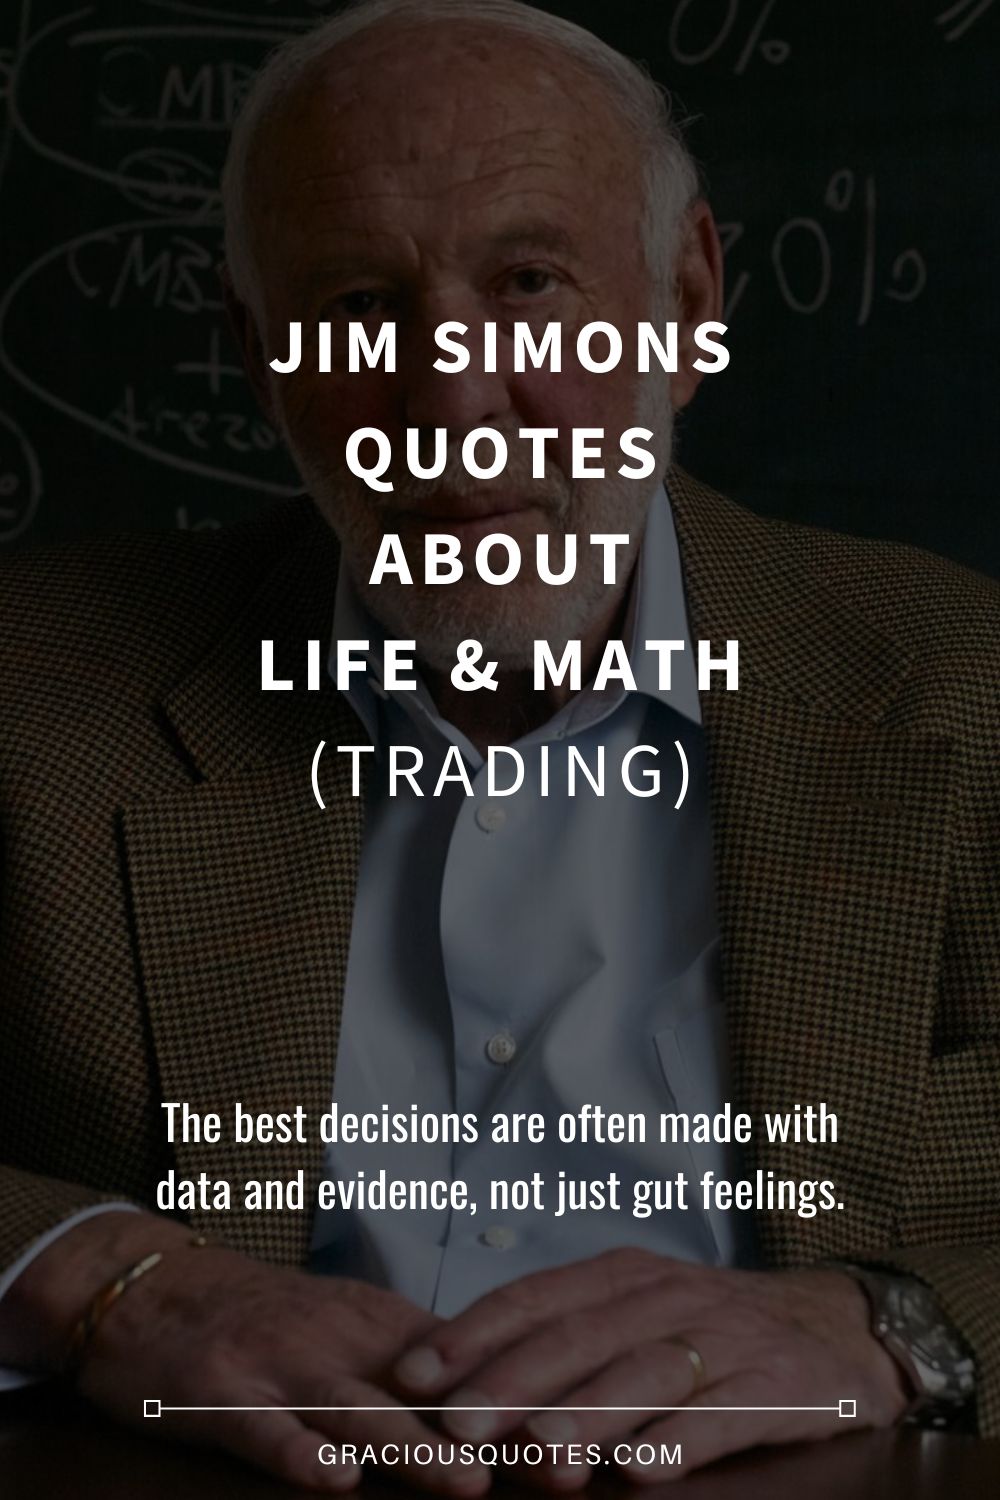 Jim Simons Quotes About Life & Math (TRADING) - Gracious Quotes